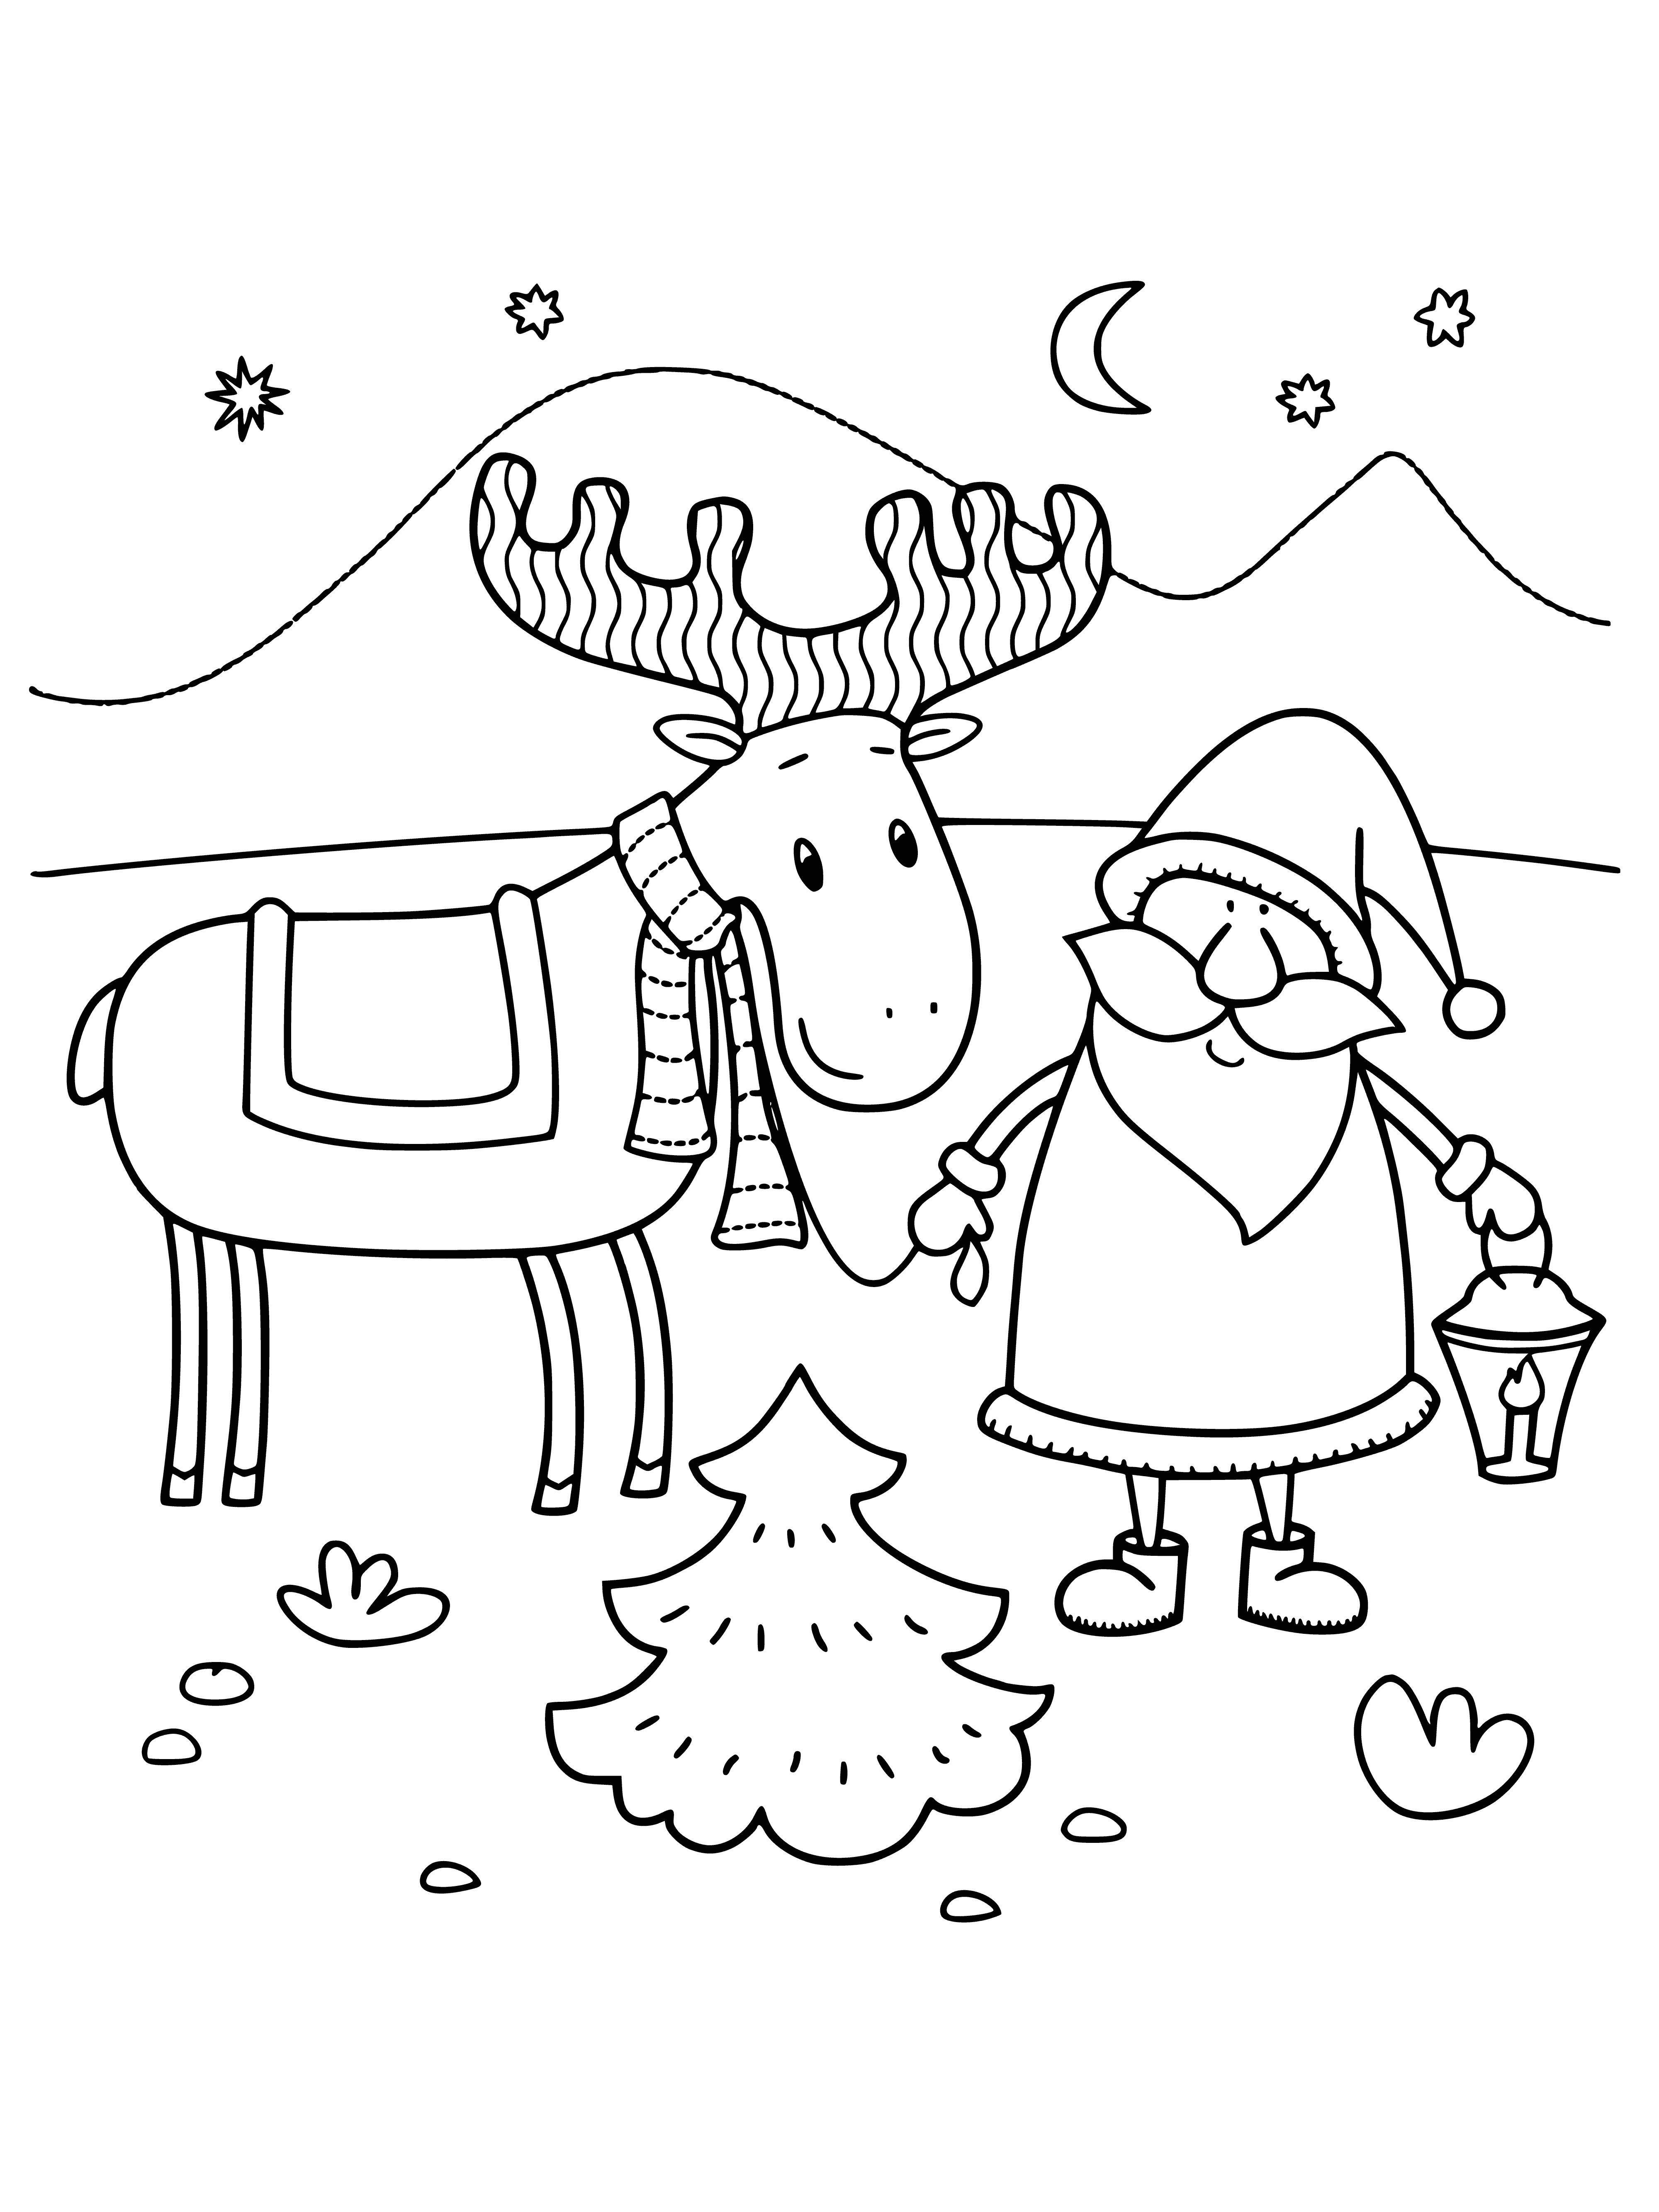 Santa Claus with deer in a color page - white beard, red coat, brown fur, antlers.